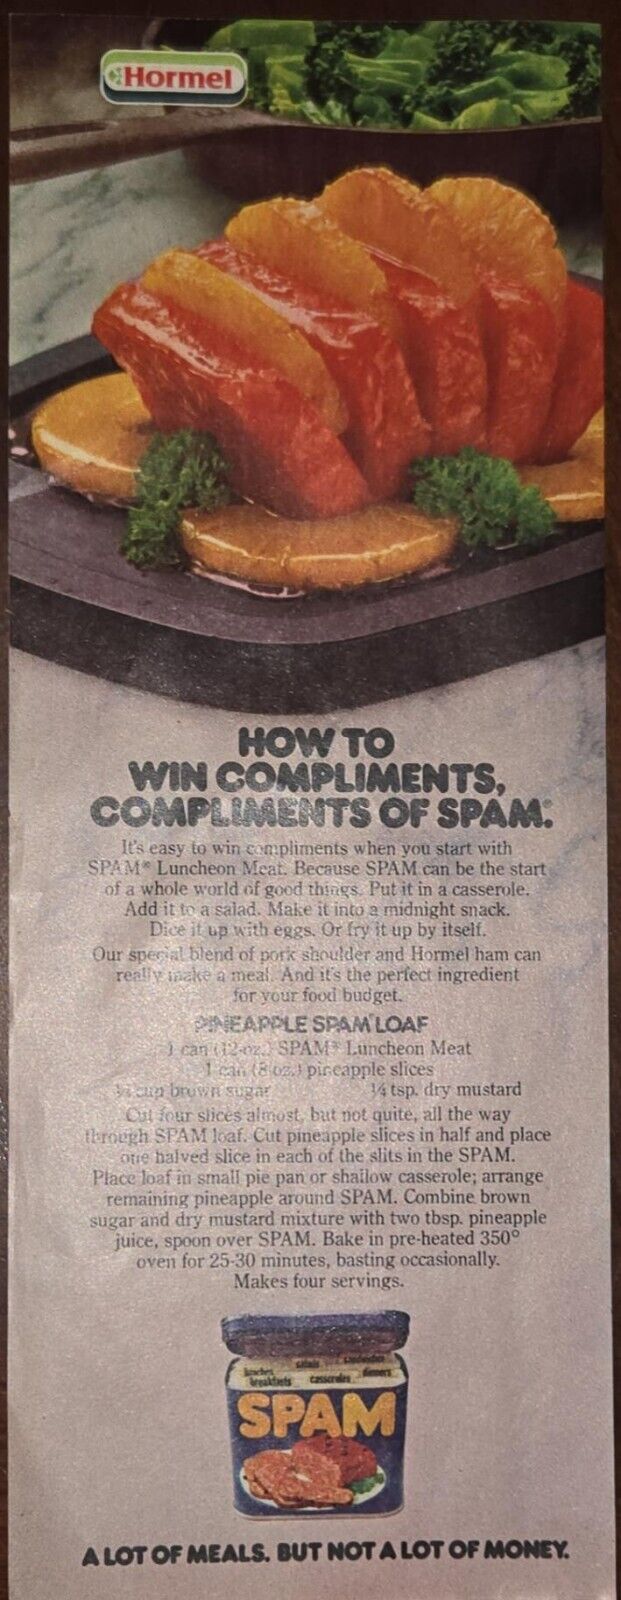 SPAM 1980 Hormel Vintage Print Ad Recipe For Pineapple SPAM Loaf Luncheon Meat